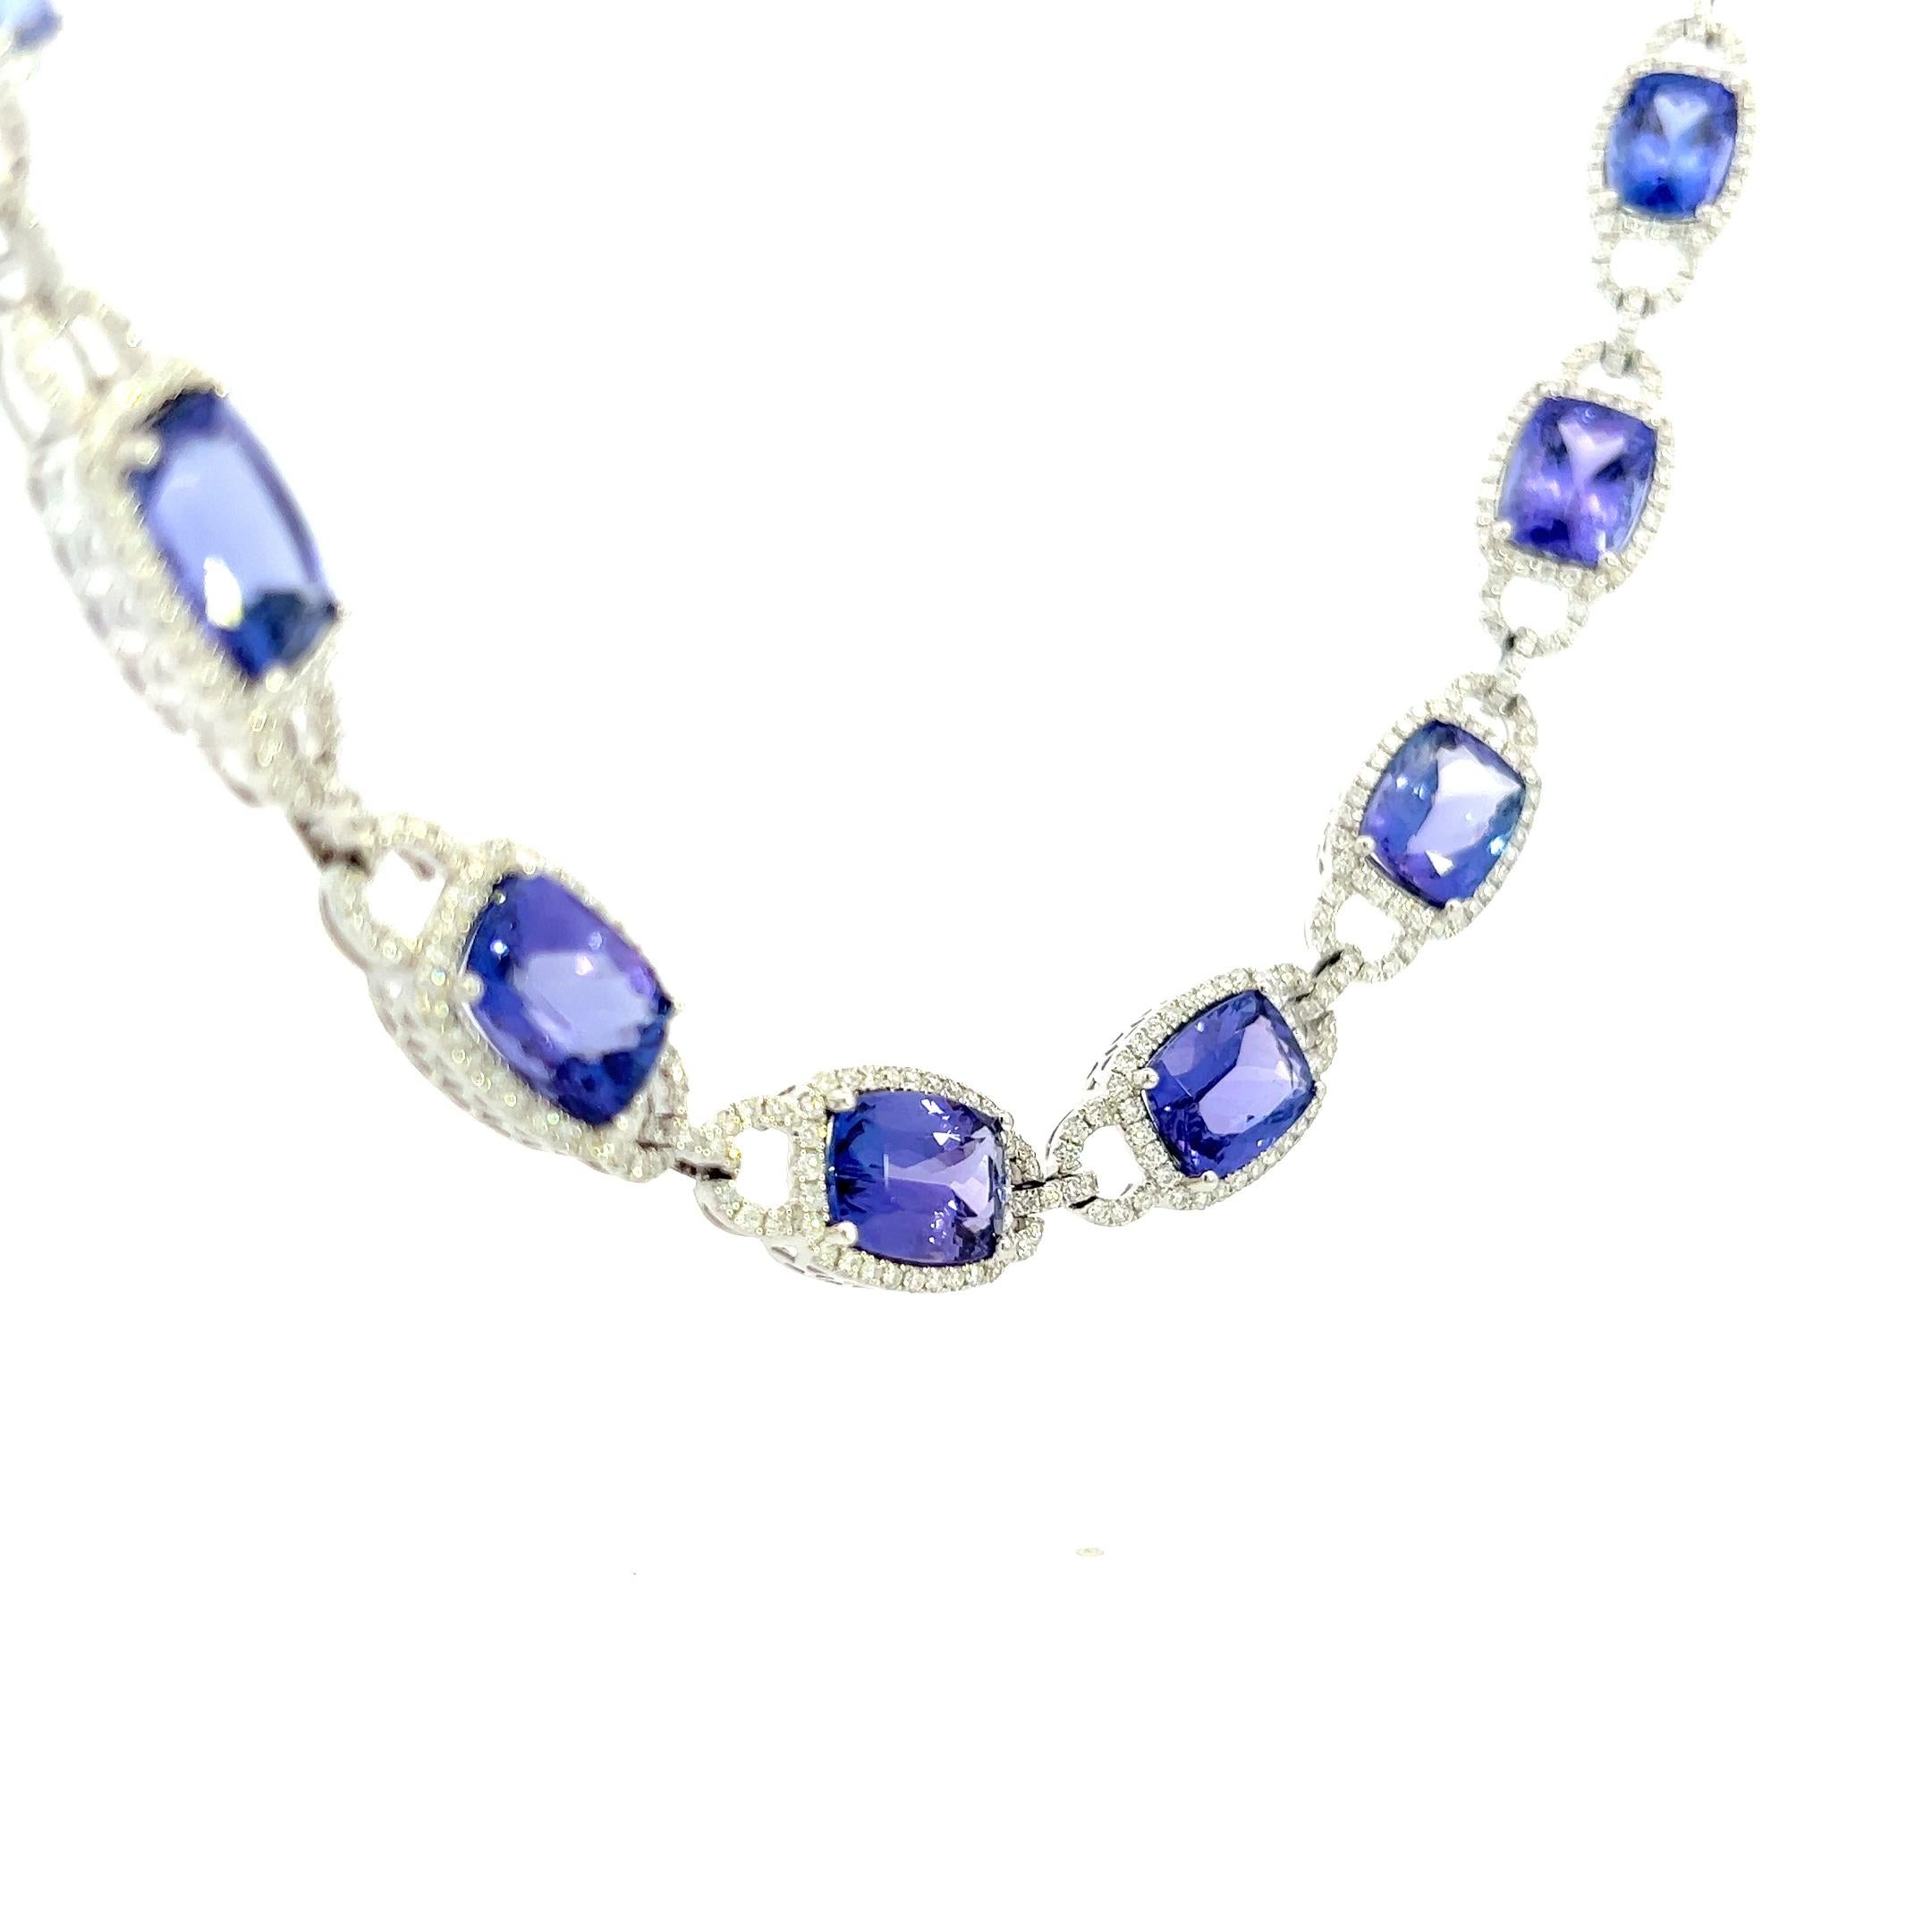 Exquisite 14 Karat White Gold Cushion Tanzanite Necklace - Vivid AAA Quality In New Condition For Sale In Great Neck Plaza, NY